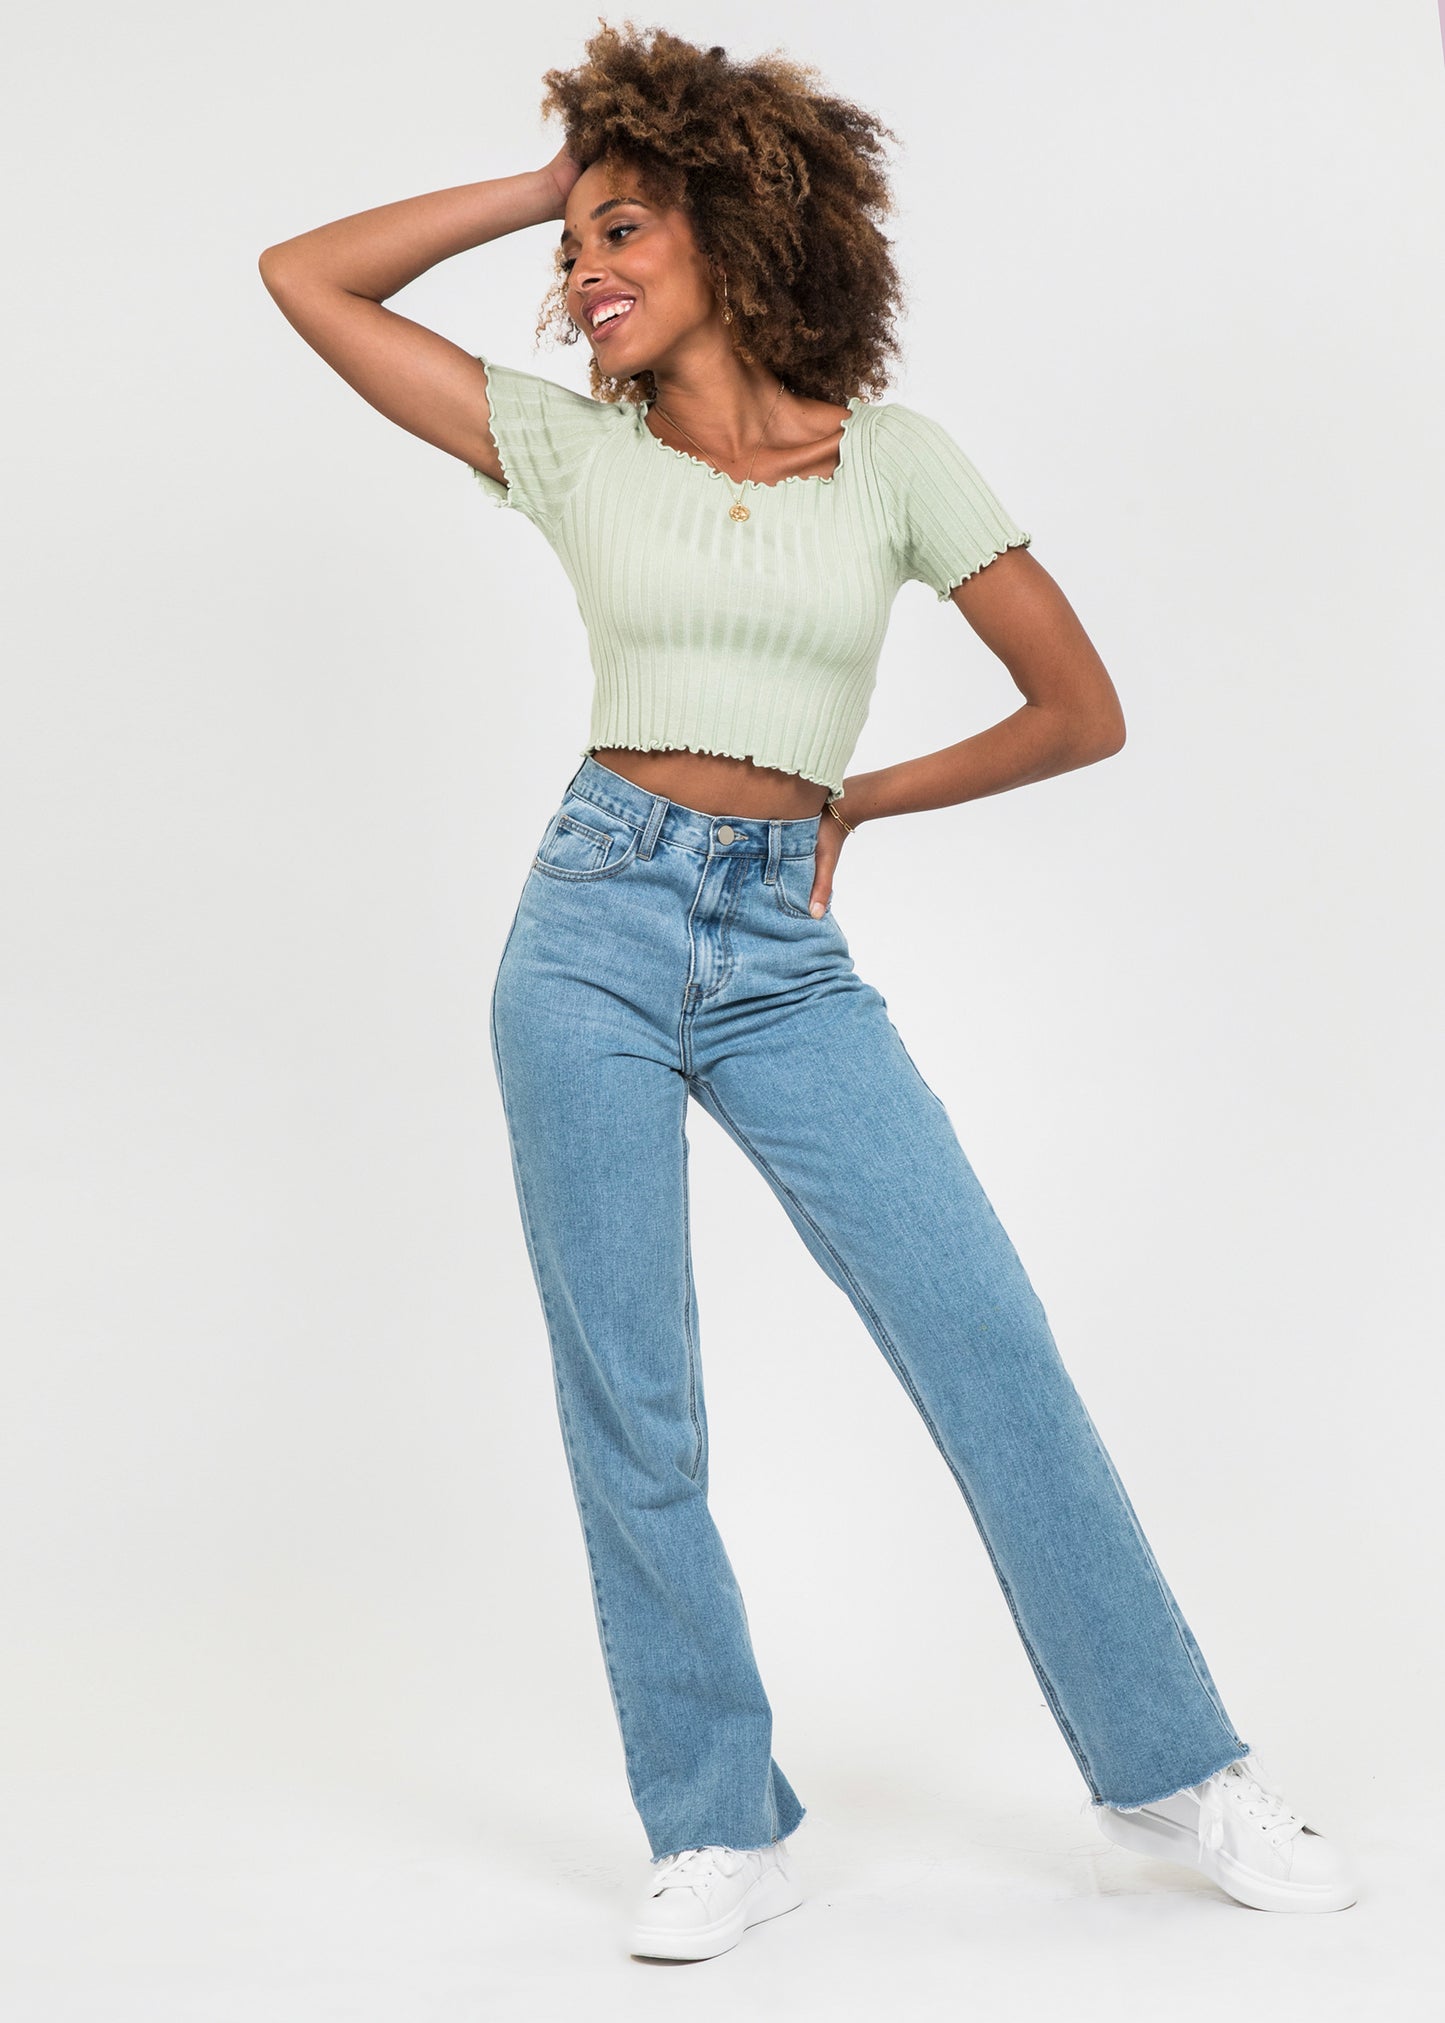 Ribbed top with lettuce edge detail in green